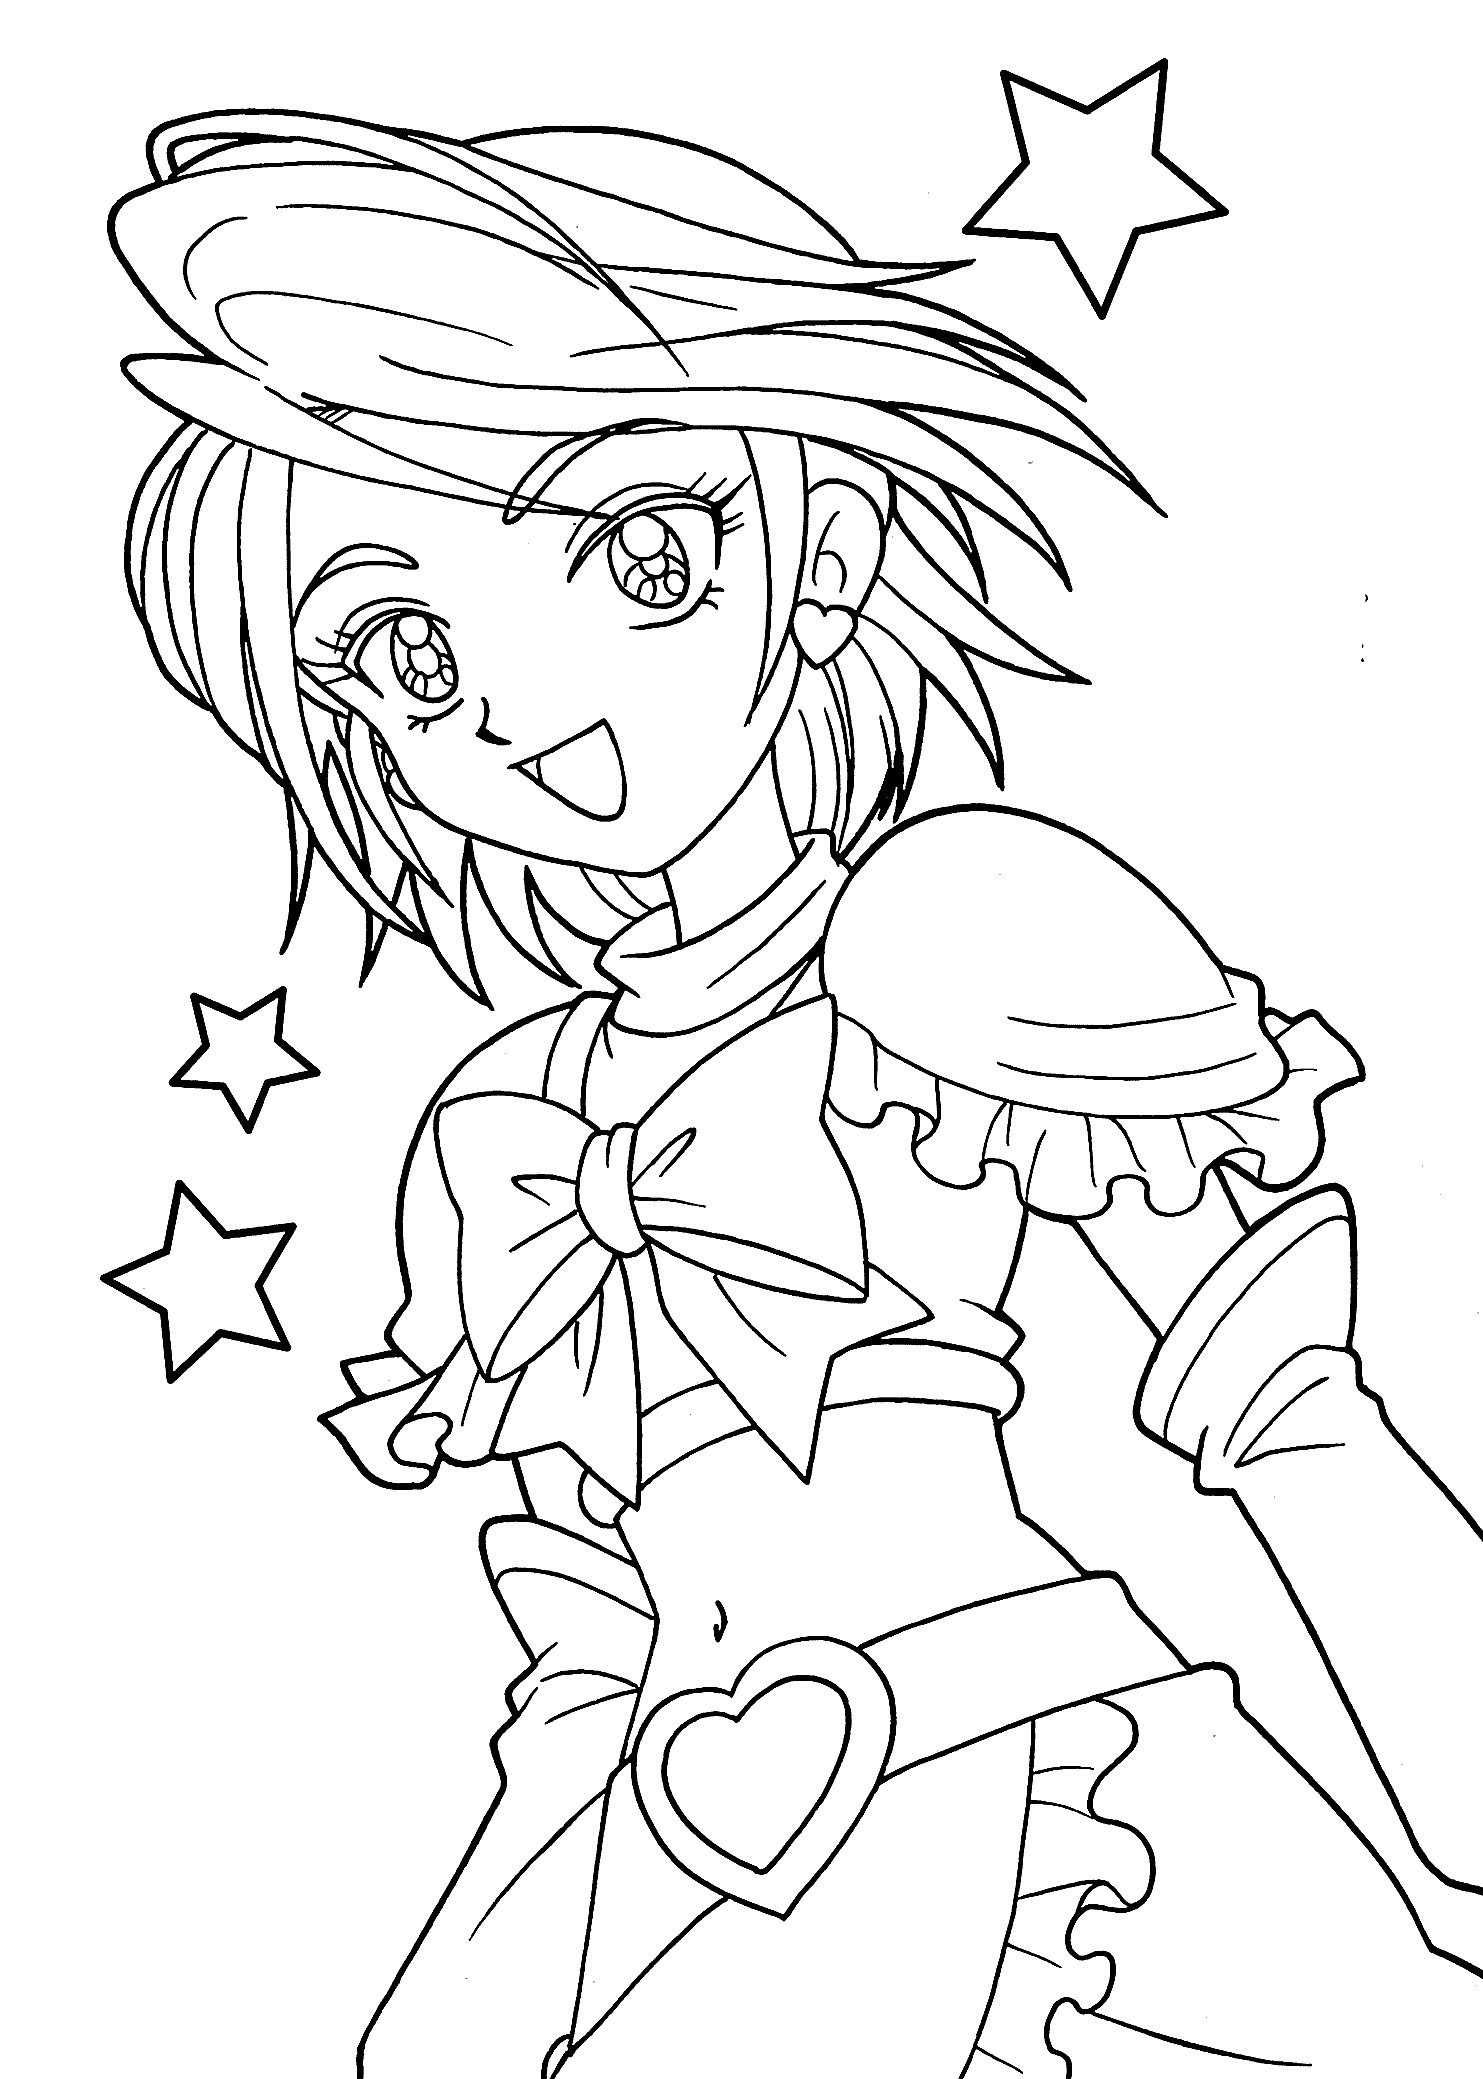 Coloring Sheets For Girls Free Printable
 13 Best of Anime Girl Coloring Pages Bestofcoloring